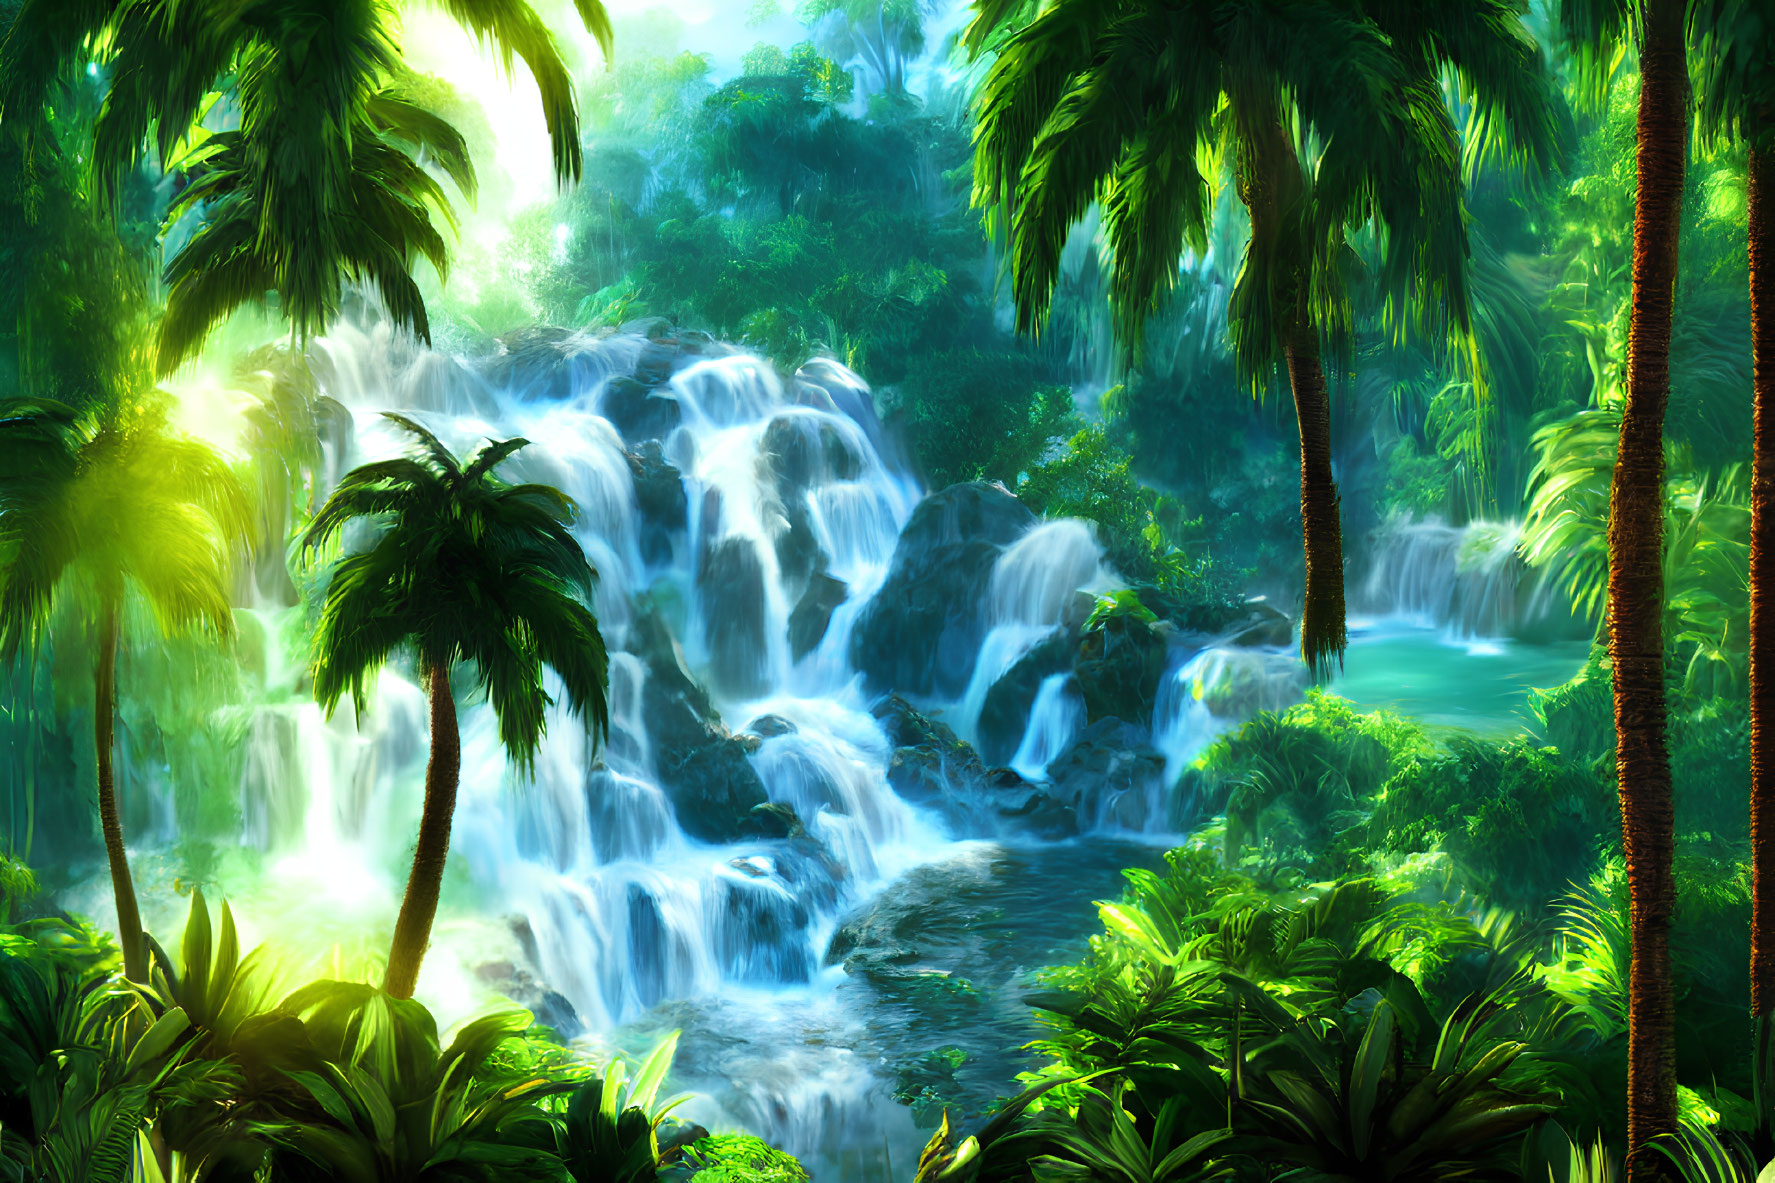 Vibrant digital artwork of lush tropical forest with waterfall